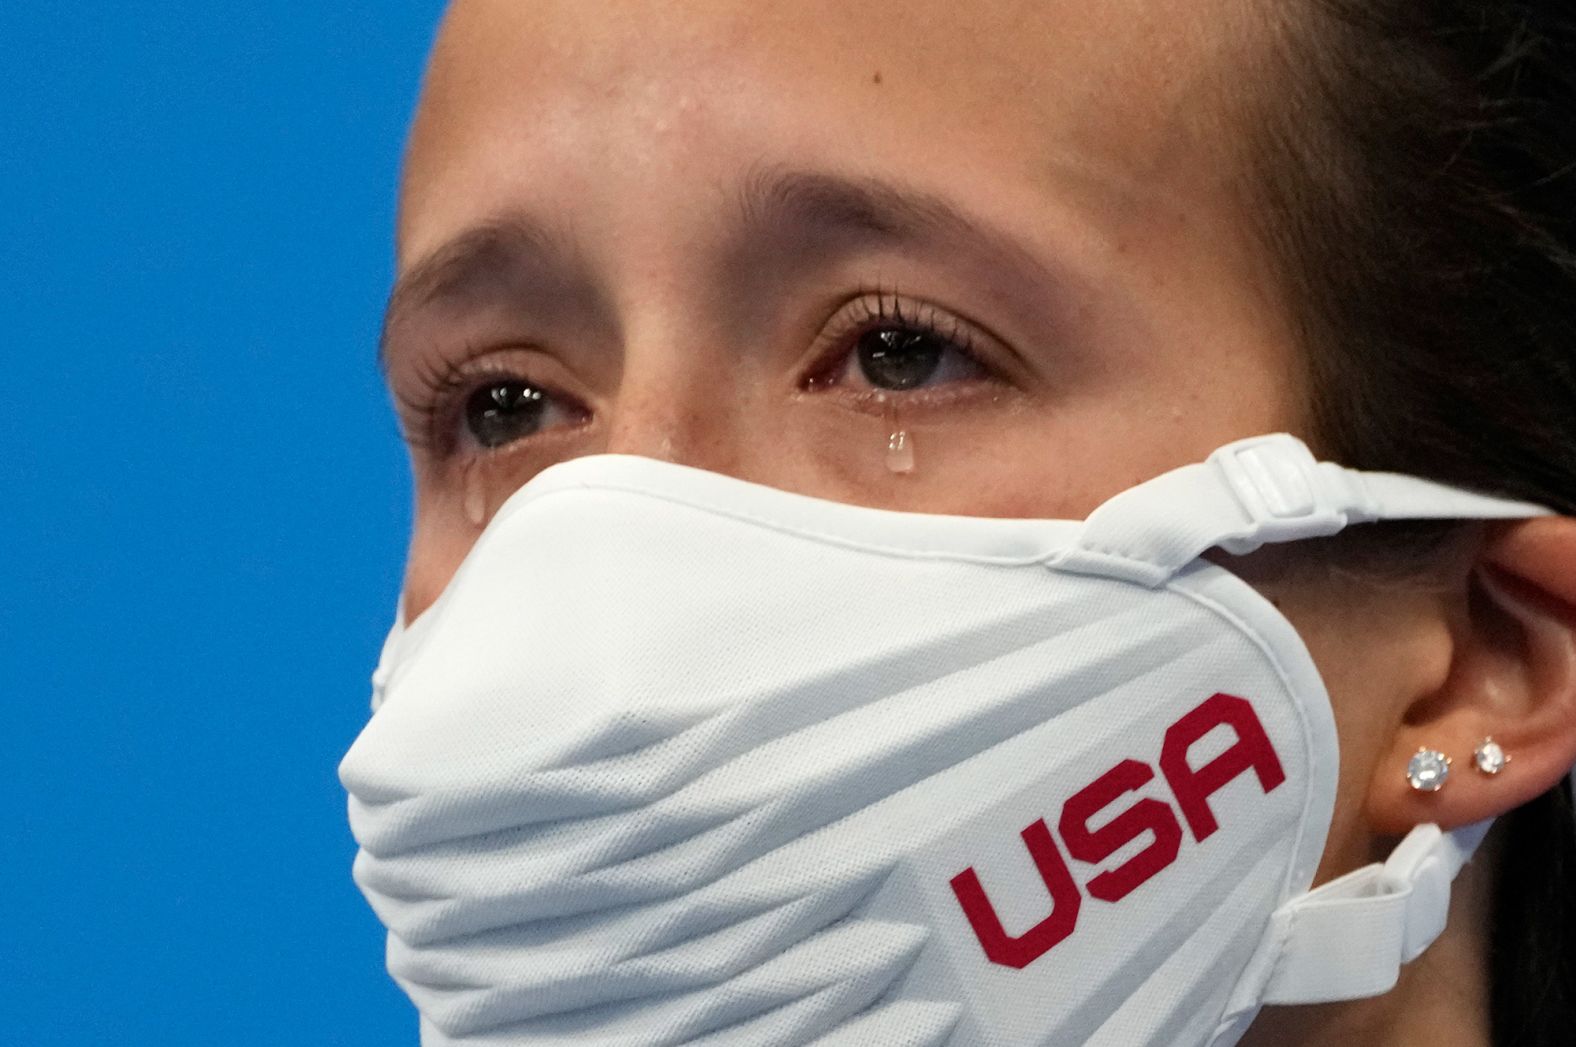 US diver Jessica Parratto cries after she and teammate Delaney Schnell won a silver medal in <a href="index.php?page=&url=https%3A%2F%2Fwww.cnn.com%2Fworld%2Flive-news%2Ftokyo-2020-olympics-07-27-21-spt%2Fh_b02acea3373d34c2ca2446b234d2e4e4" target="_blank">the synchronized 10-meter platform event</a> on July 27.